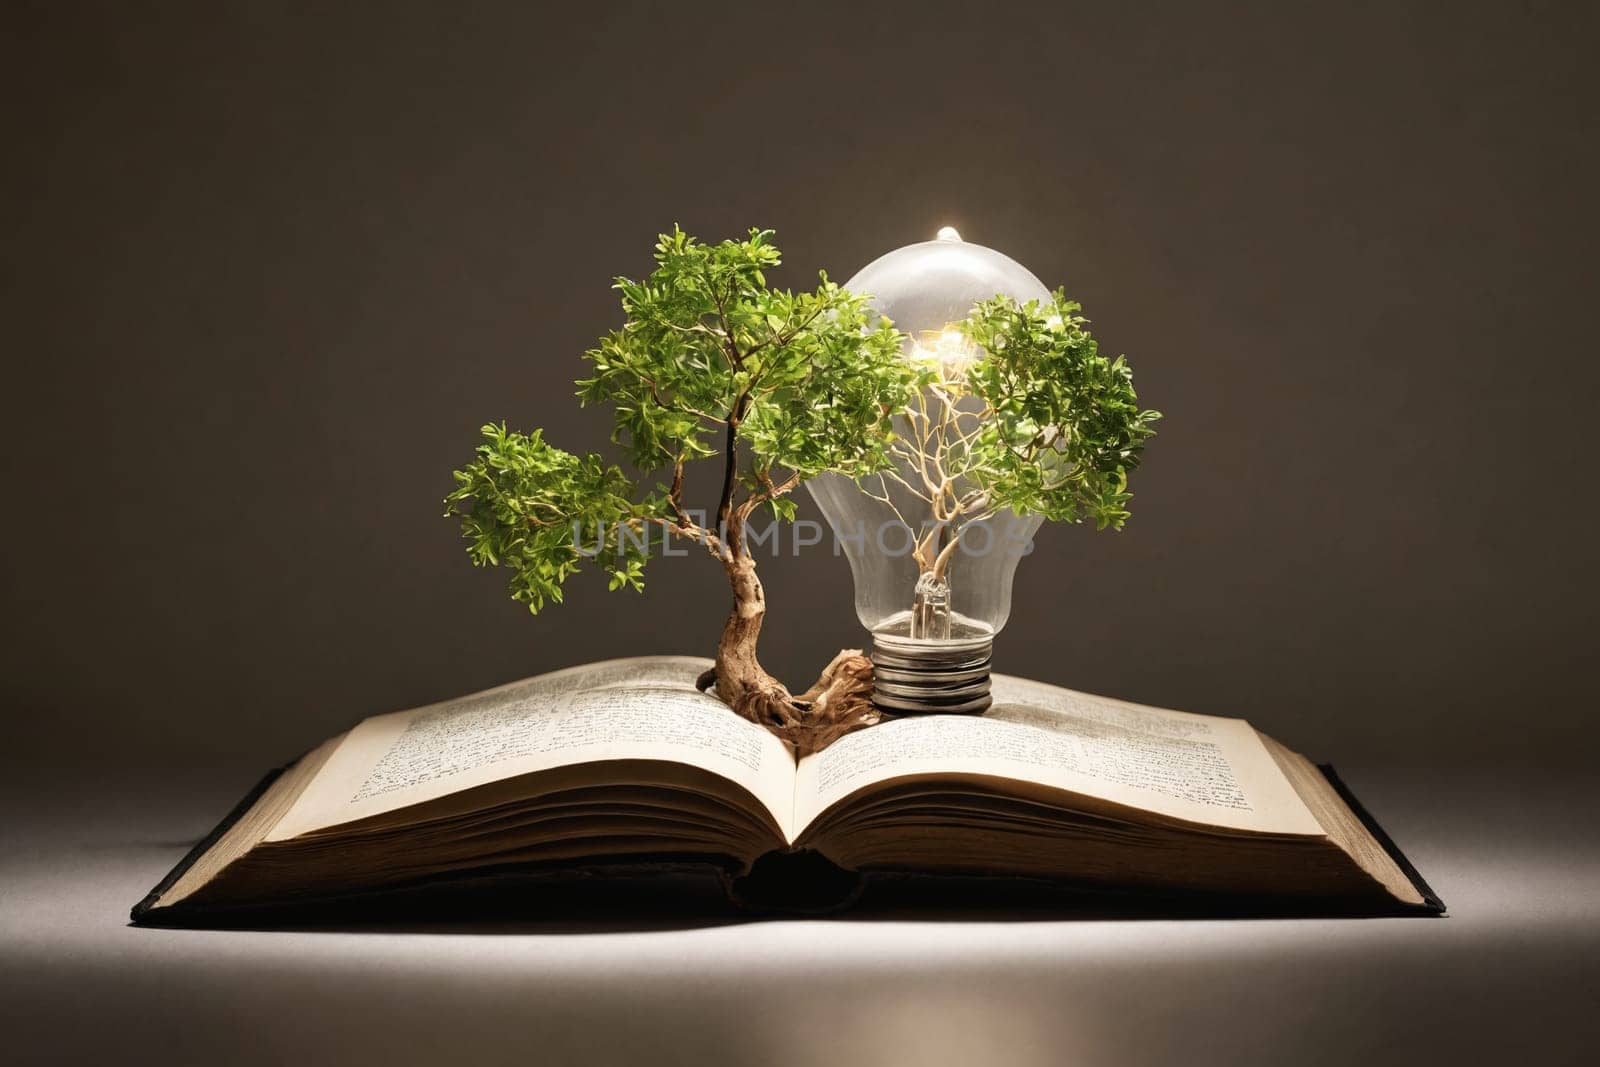 Knowledge and creativity unite as a sapling emerges from literature with a glowing bulb.